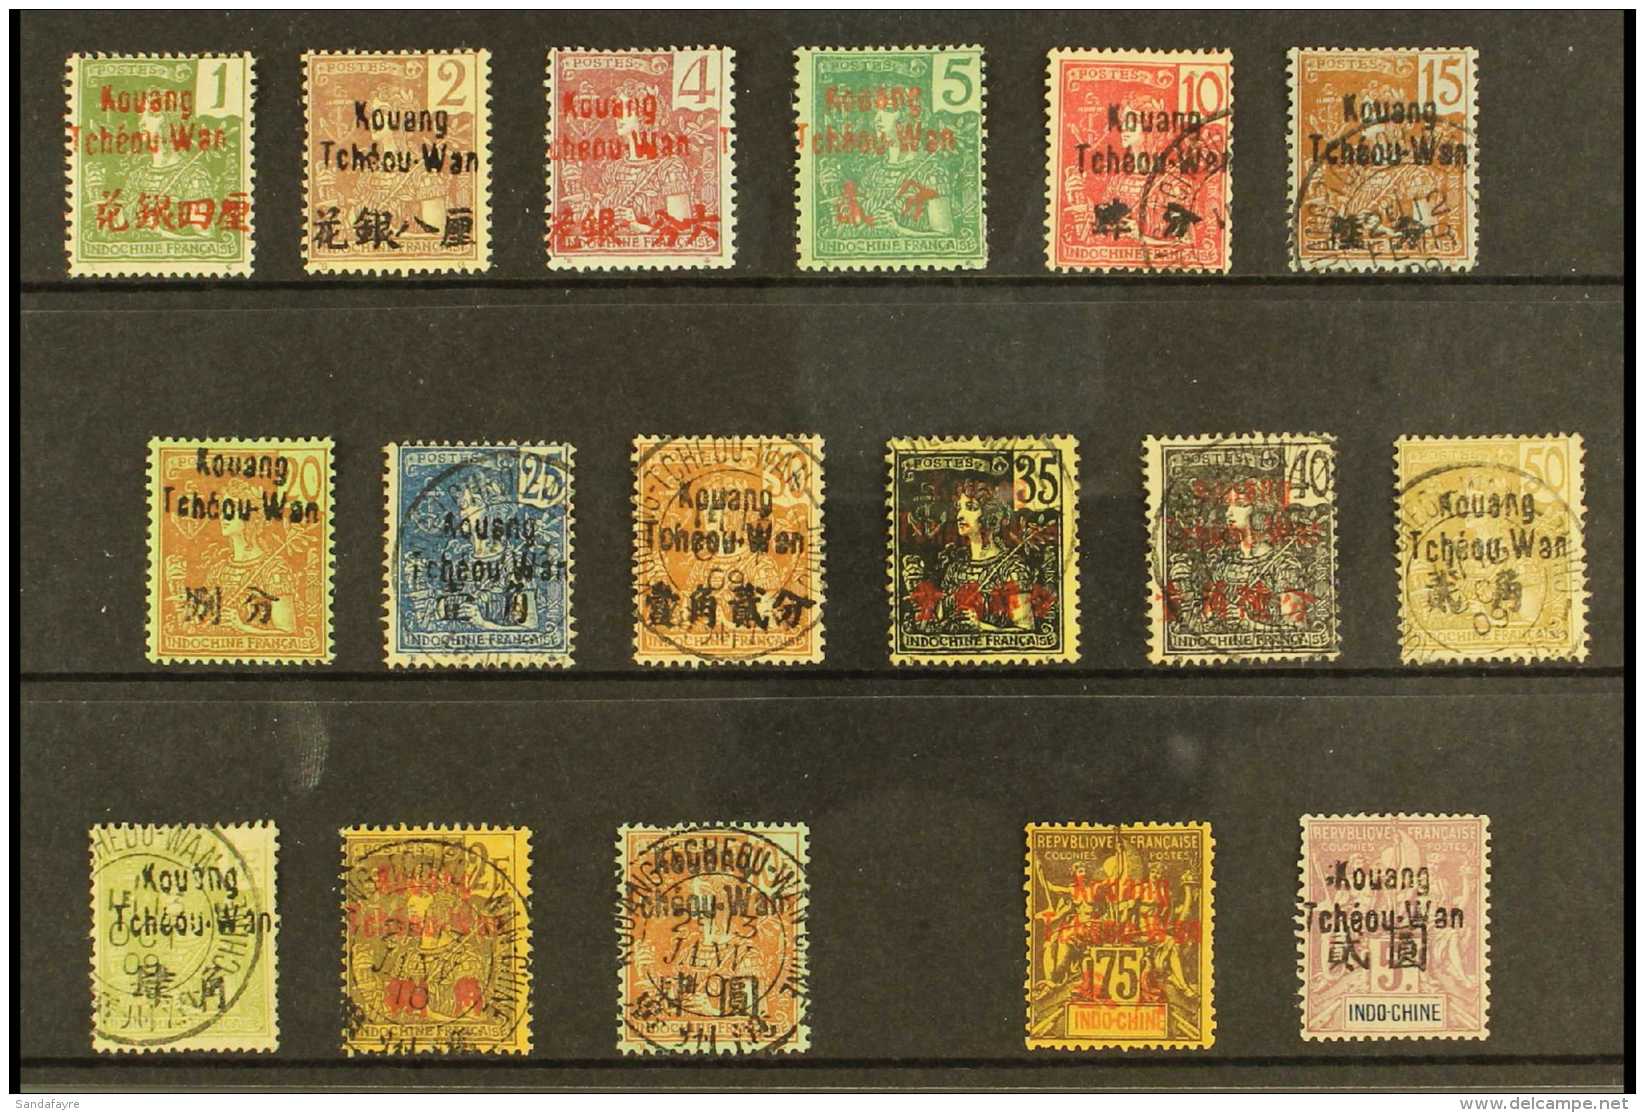 KOUNG TCHEOU 1906 Stamps Of Indo-China Overprinted, Complete Set Mint Or Superb Used With Large Kauang Tcheou Wan... - Autres & Non Classés